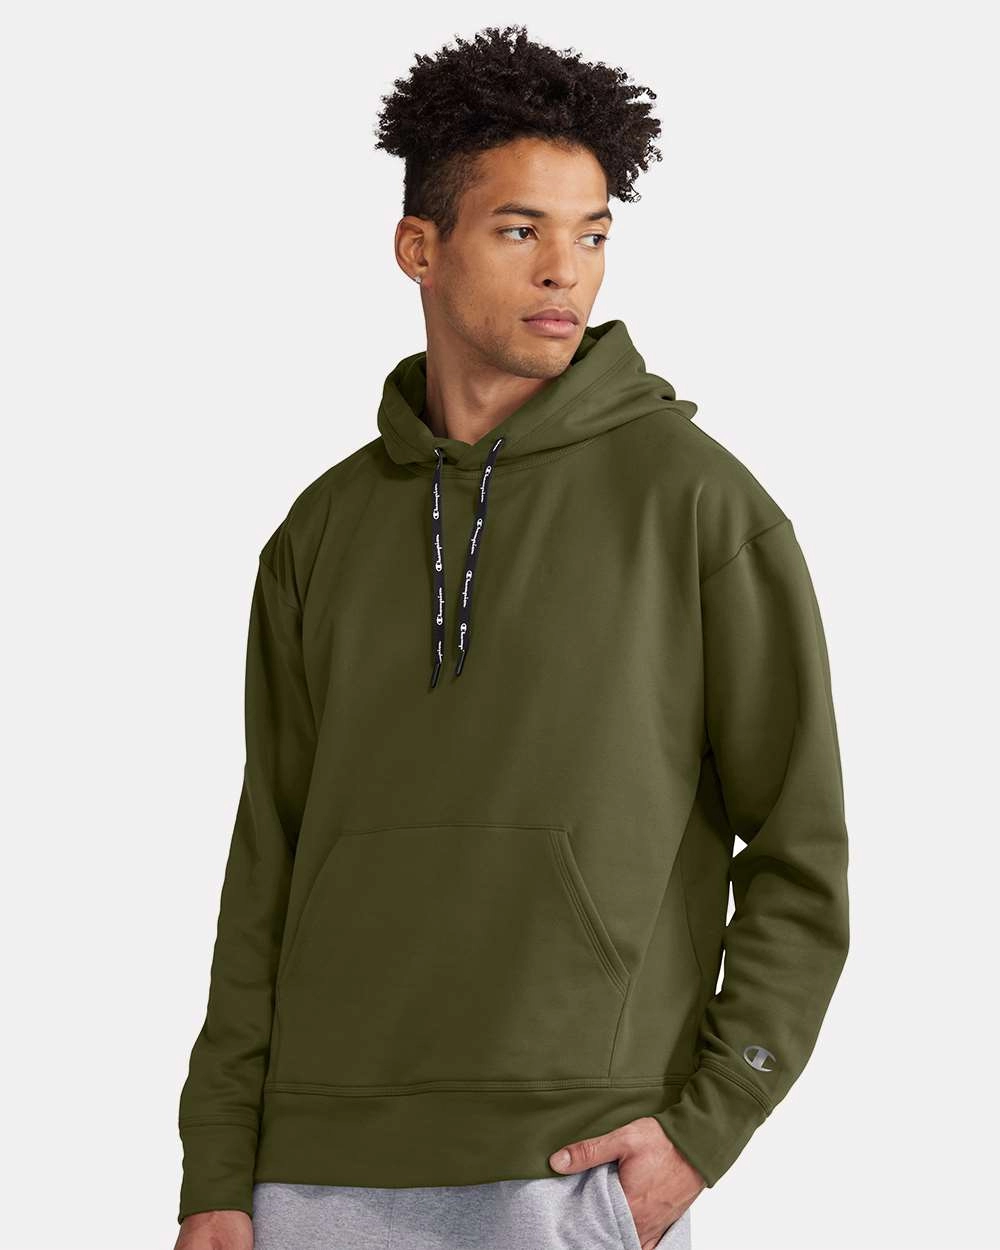 Champion Clothing CHP180 Hooded Sweatshirt - From $31.26